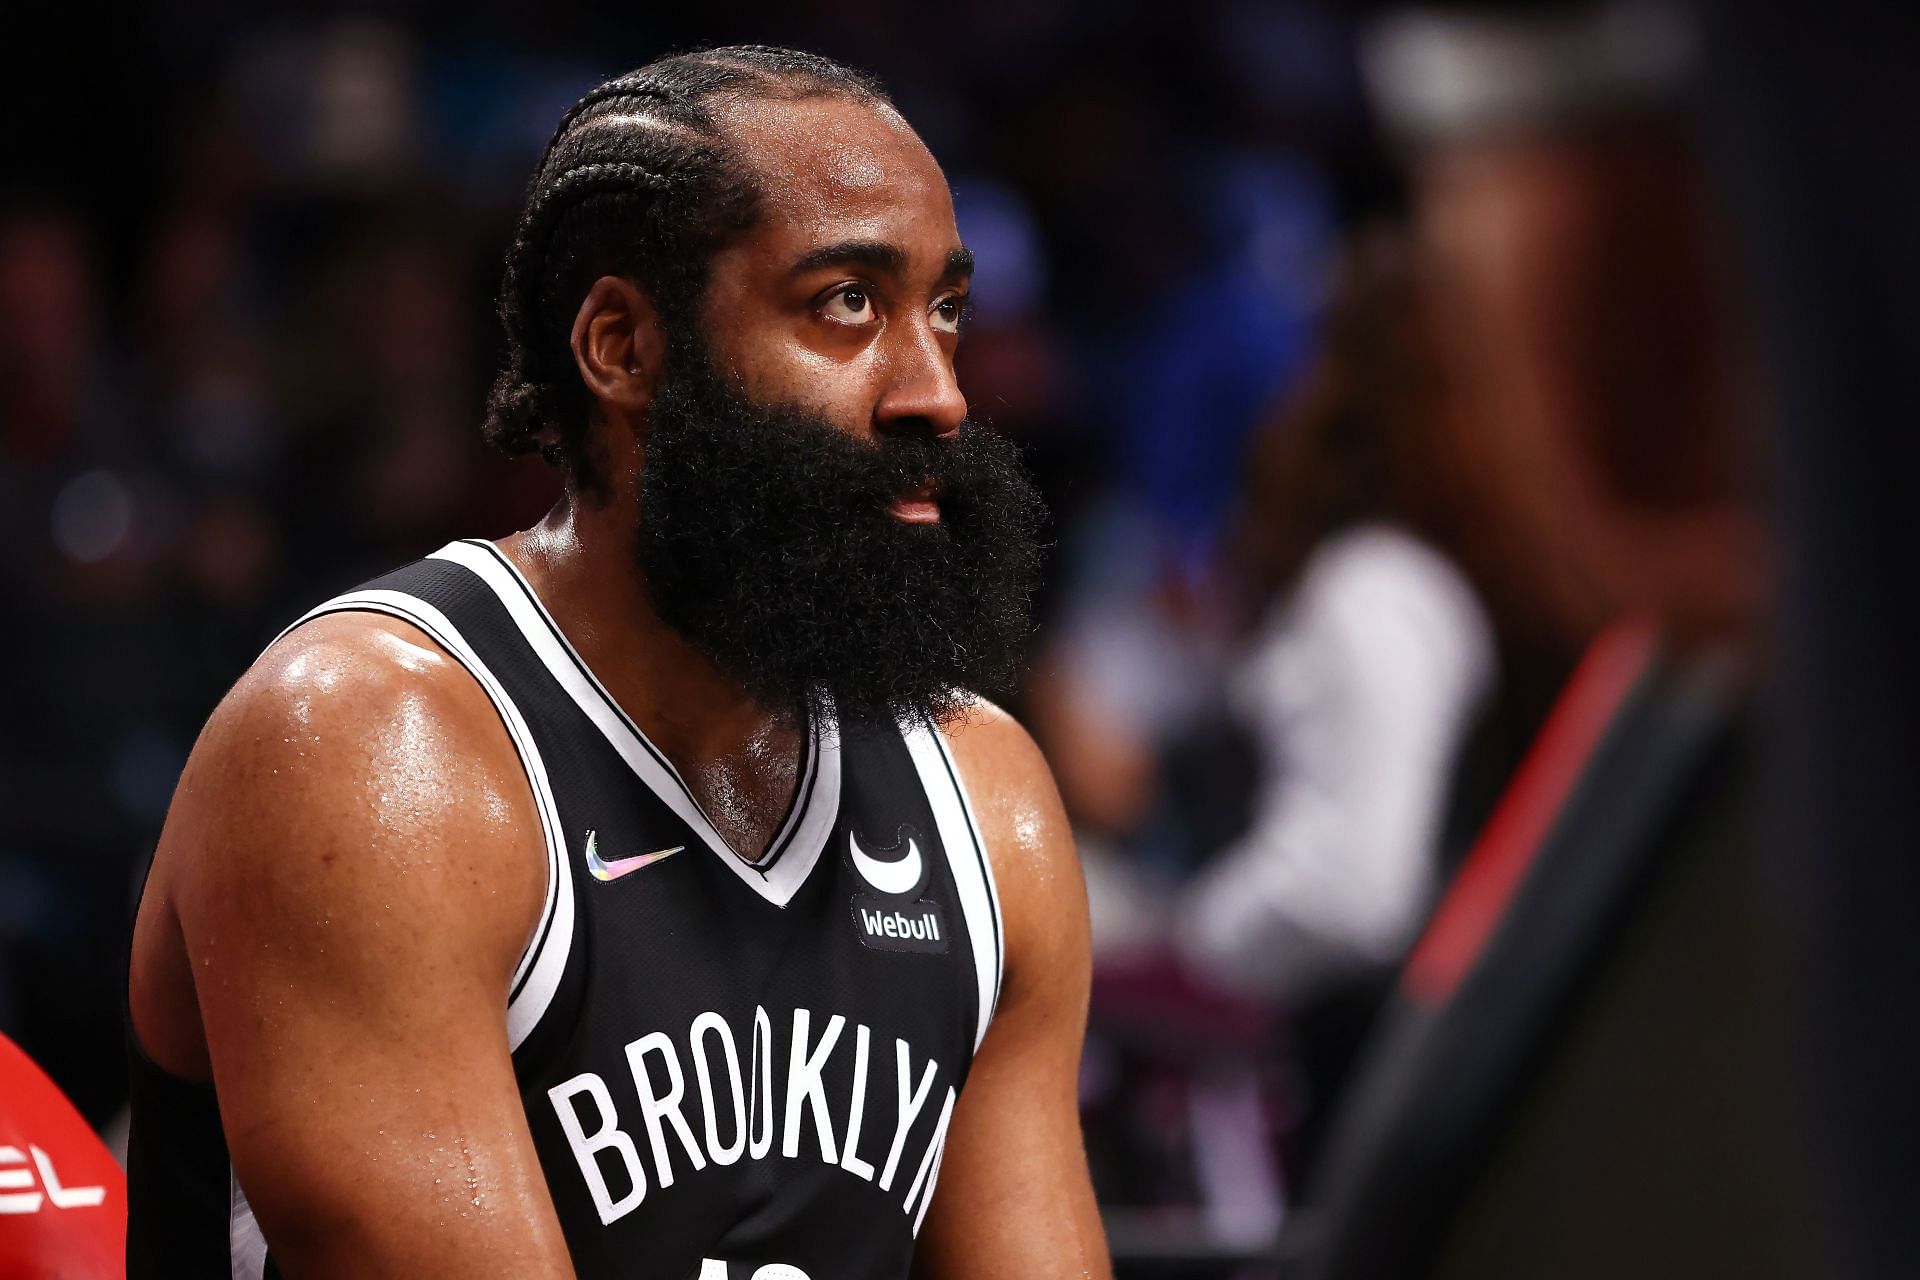 James Harden&#039;s struggles with the Brooklyn Nets this season are so apparent after years of dominance.